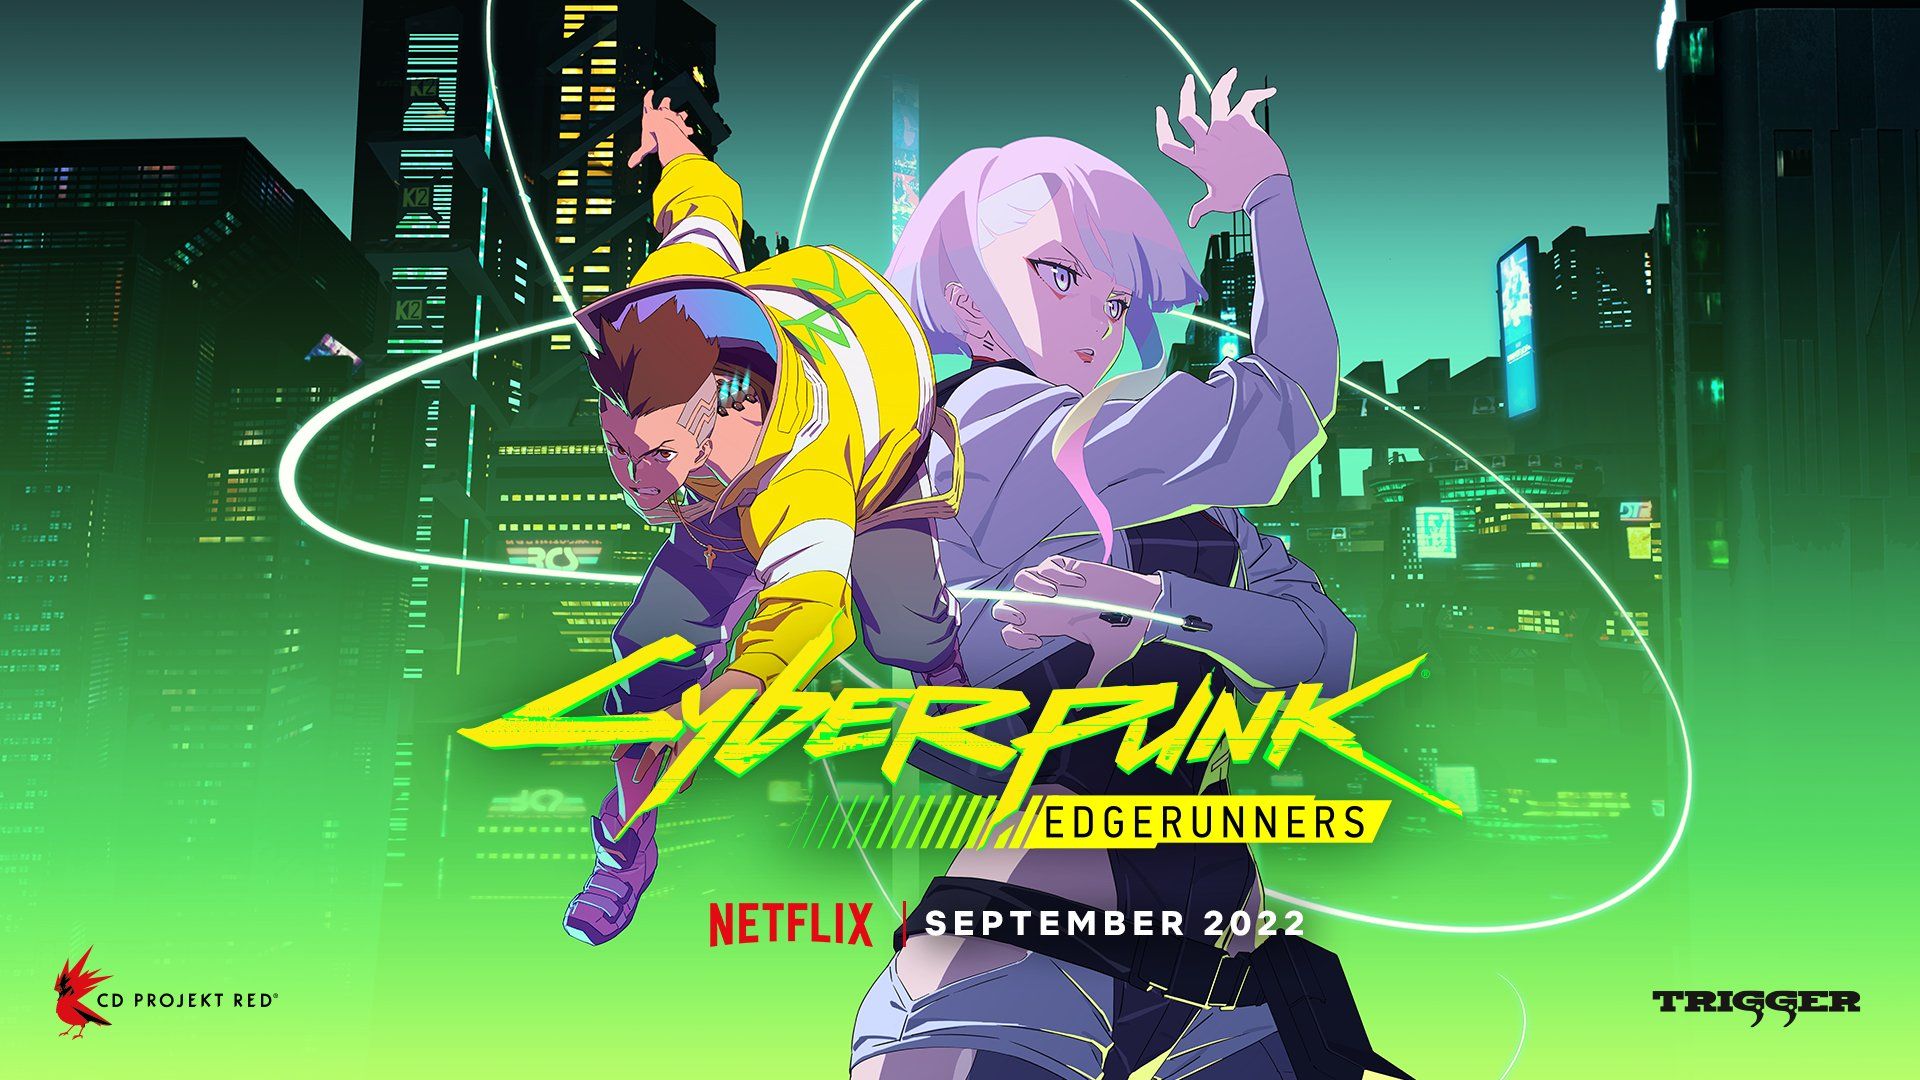 Cyberpunk: Edgerunners boldly builds on 2077's thought experiments